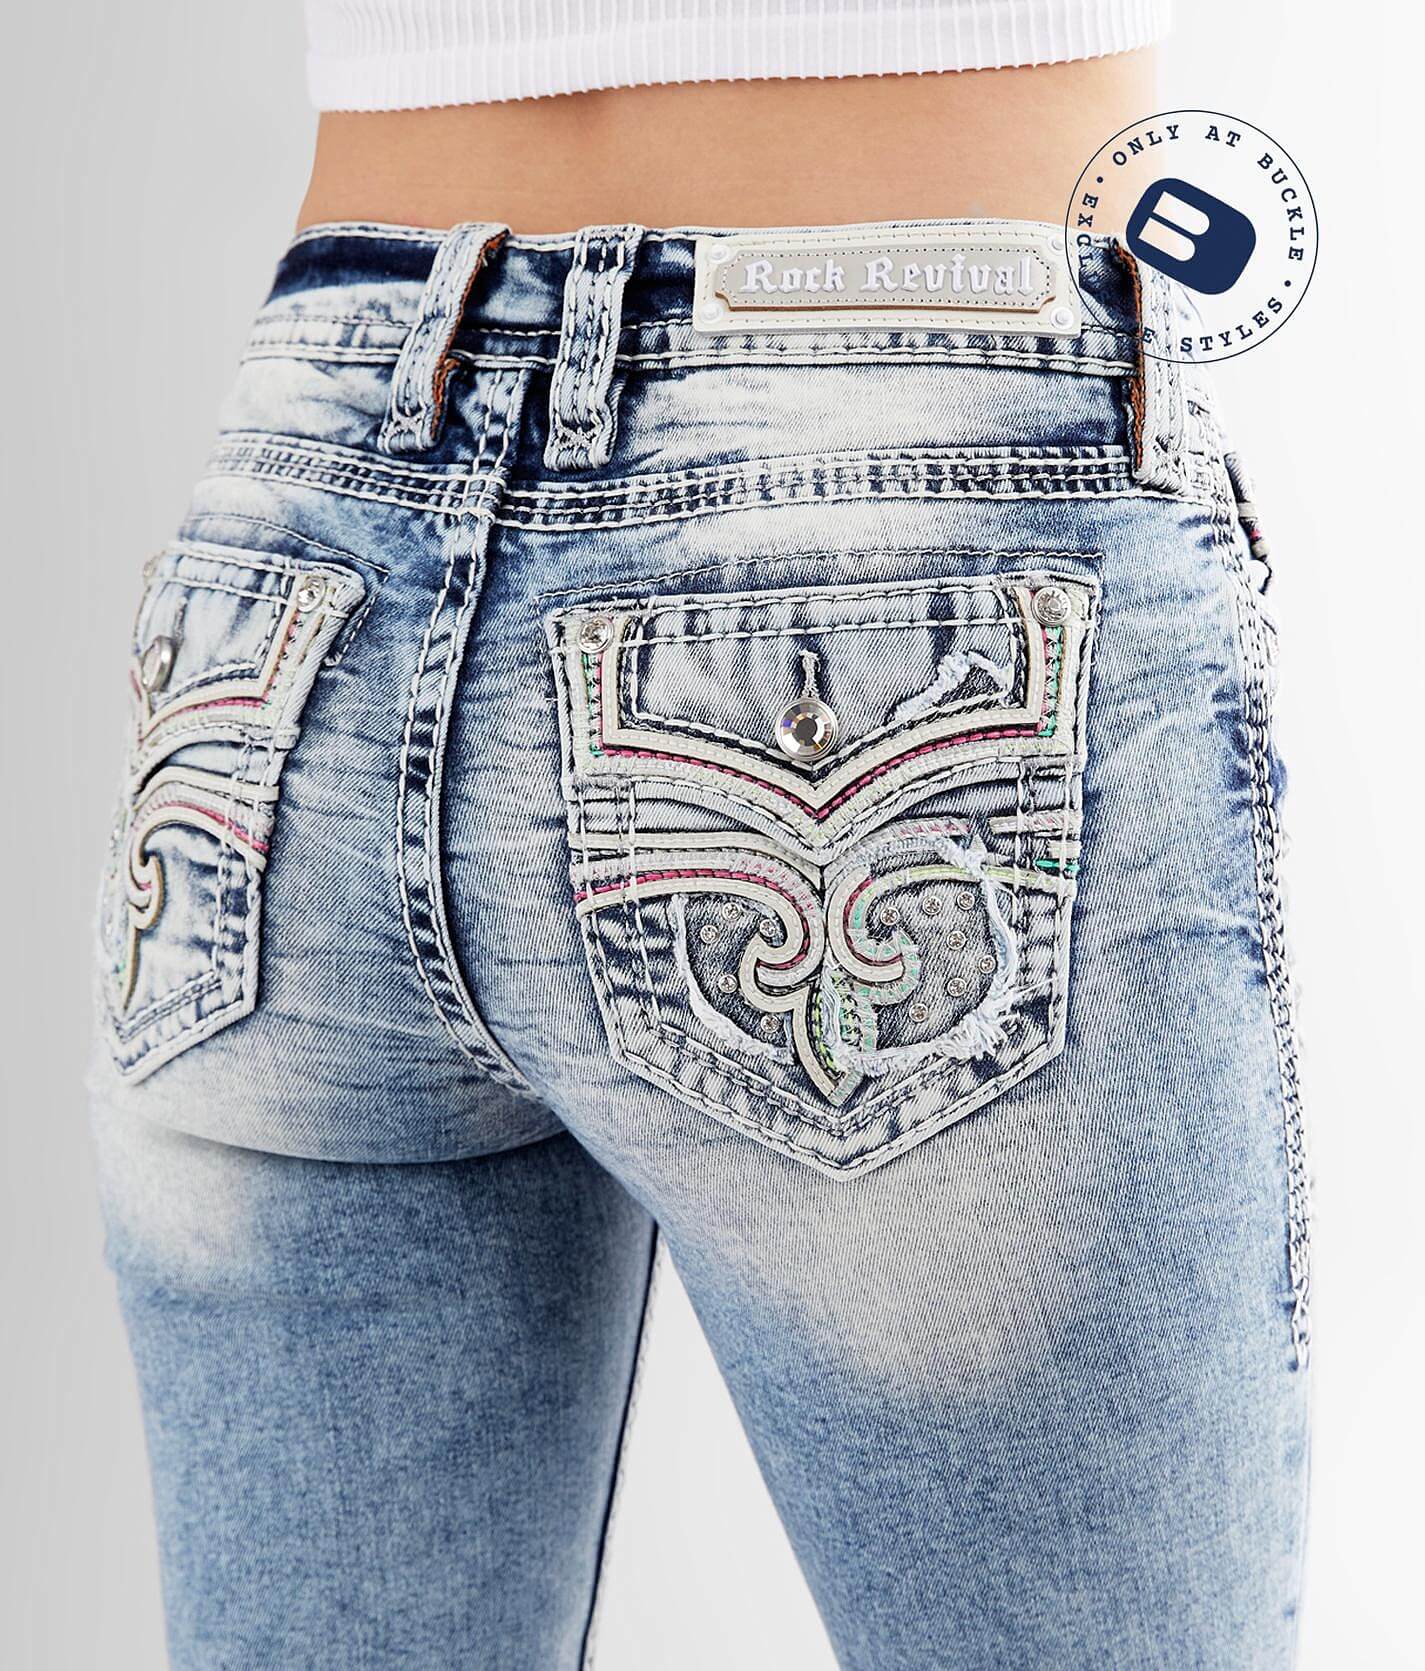 high waisted rock revival jeans